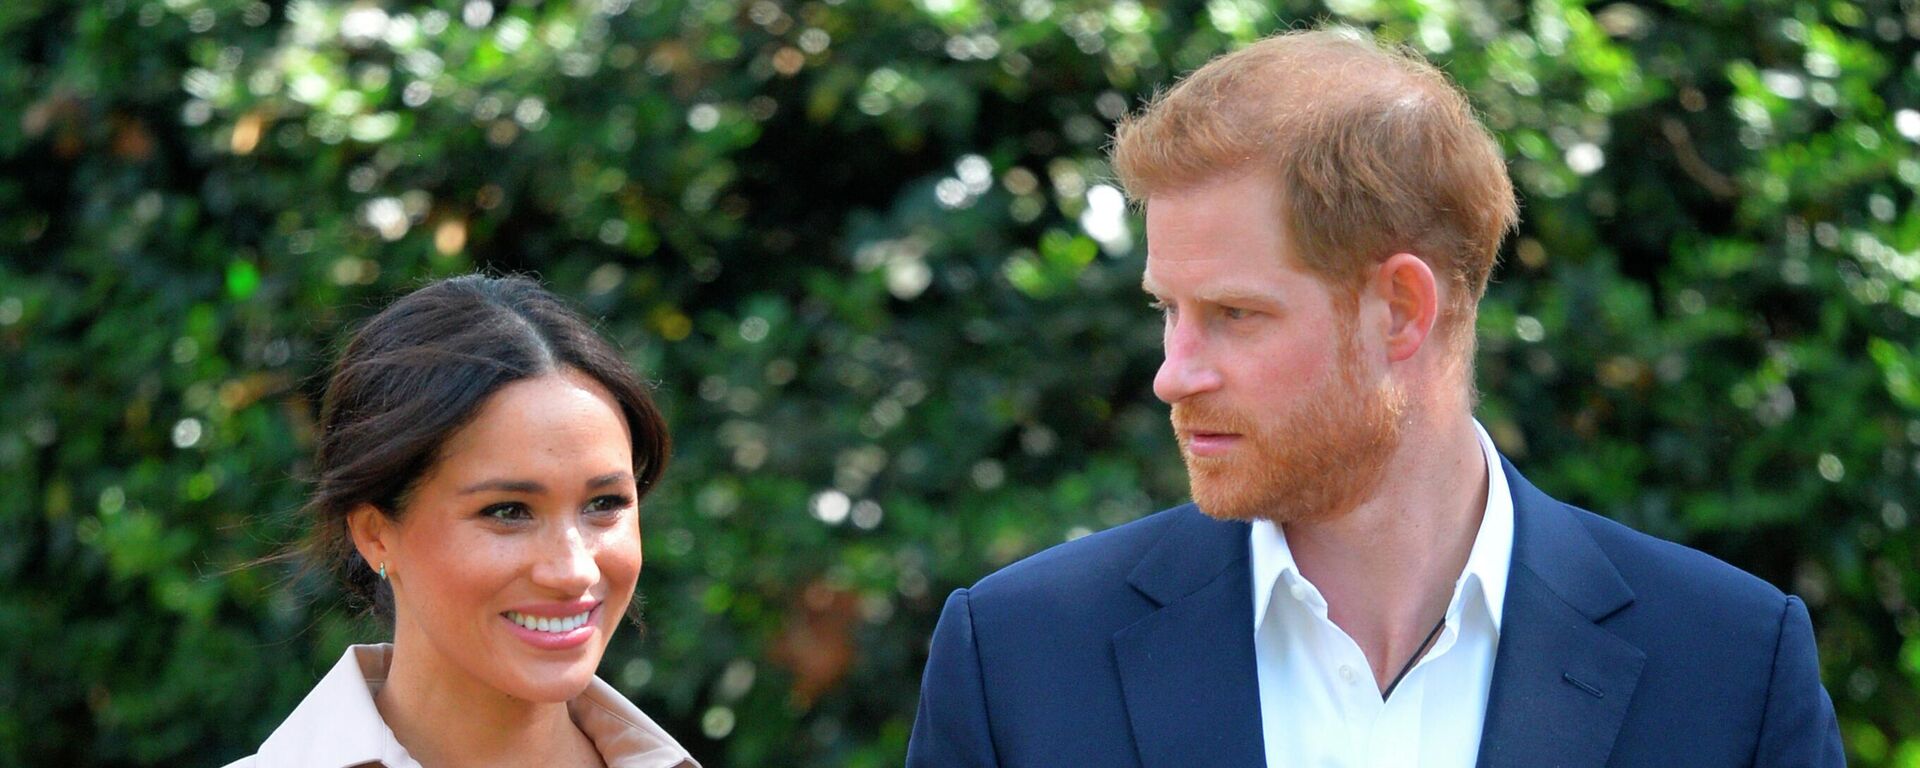 FILE - In this Oct. 2, 2019, file photo, Britain's Prince Harry and Meghan Markle appear at the Creative Industries and Business Reception at the British High Commissioner's residence in Johannesburg.  - Sputnik International, 1920, 01.11.2022